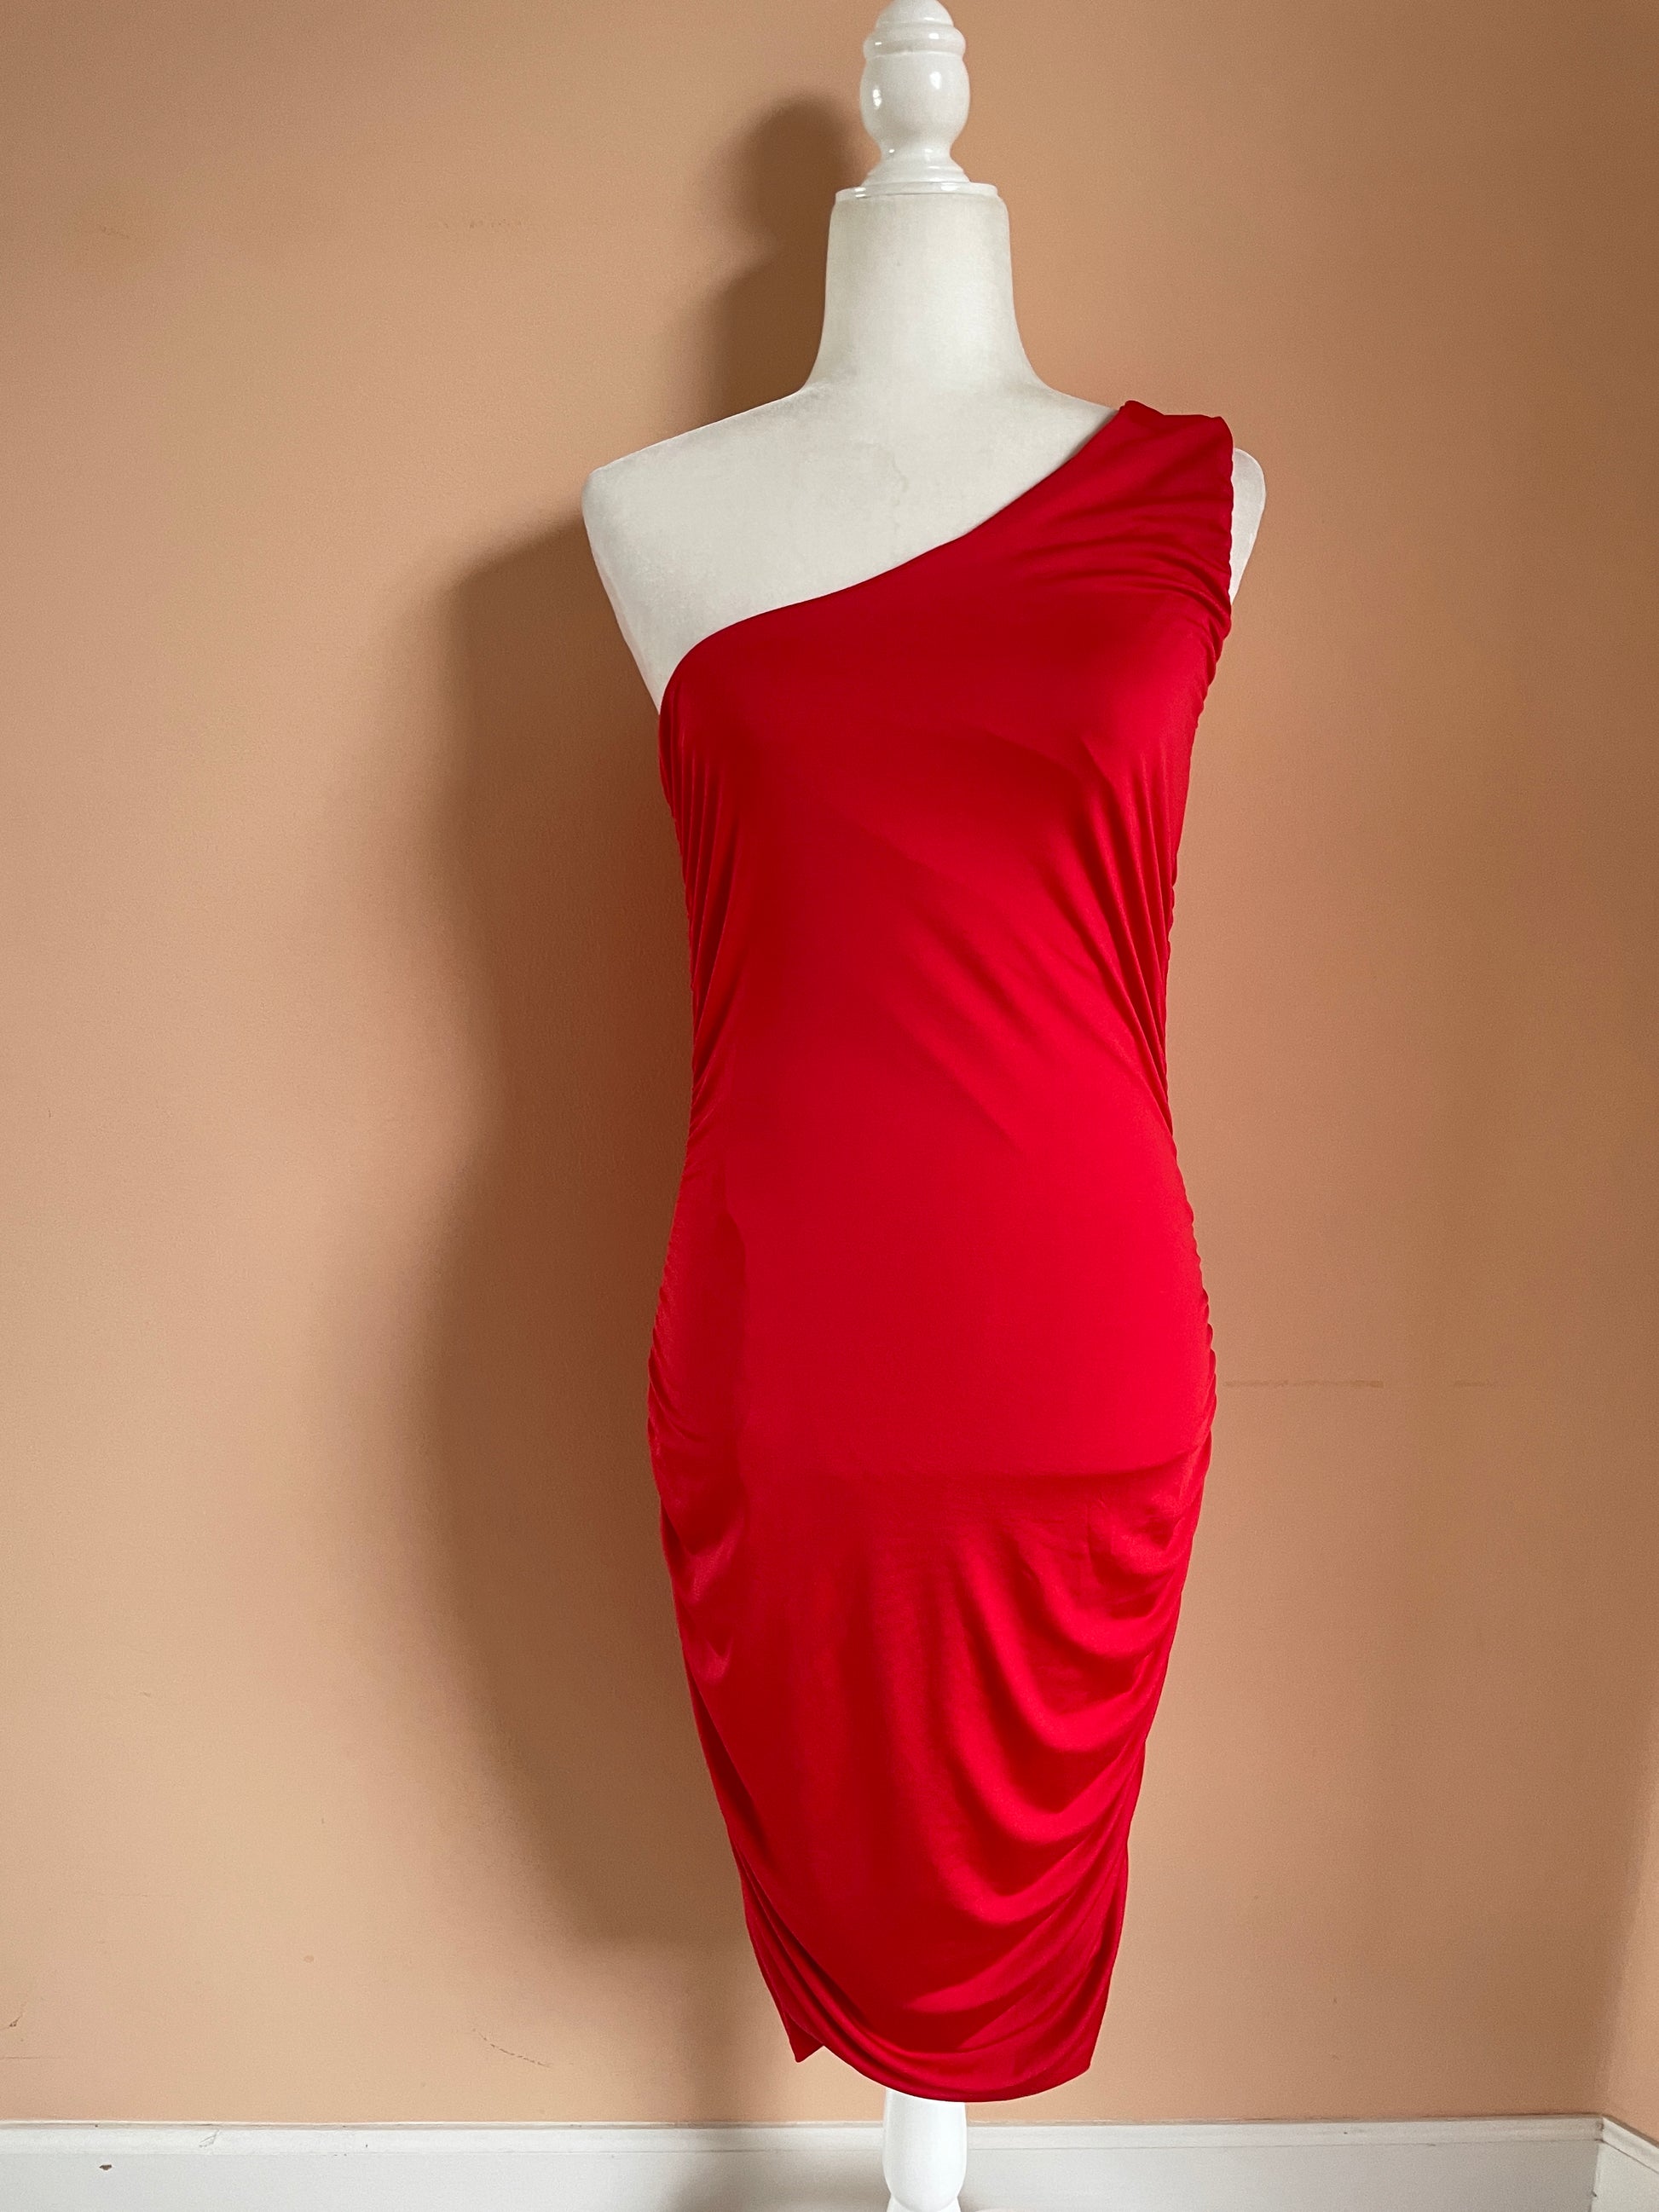 Strapless Red Dress 2000s Red Bodycon Strapless Cold Shoulder Dress M